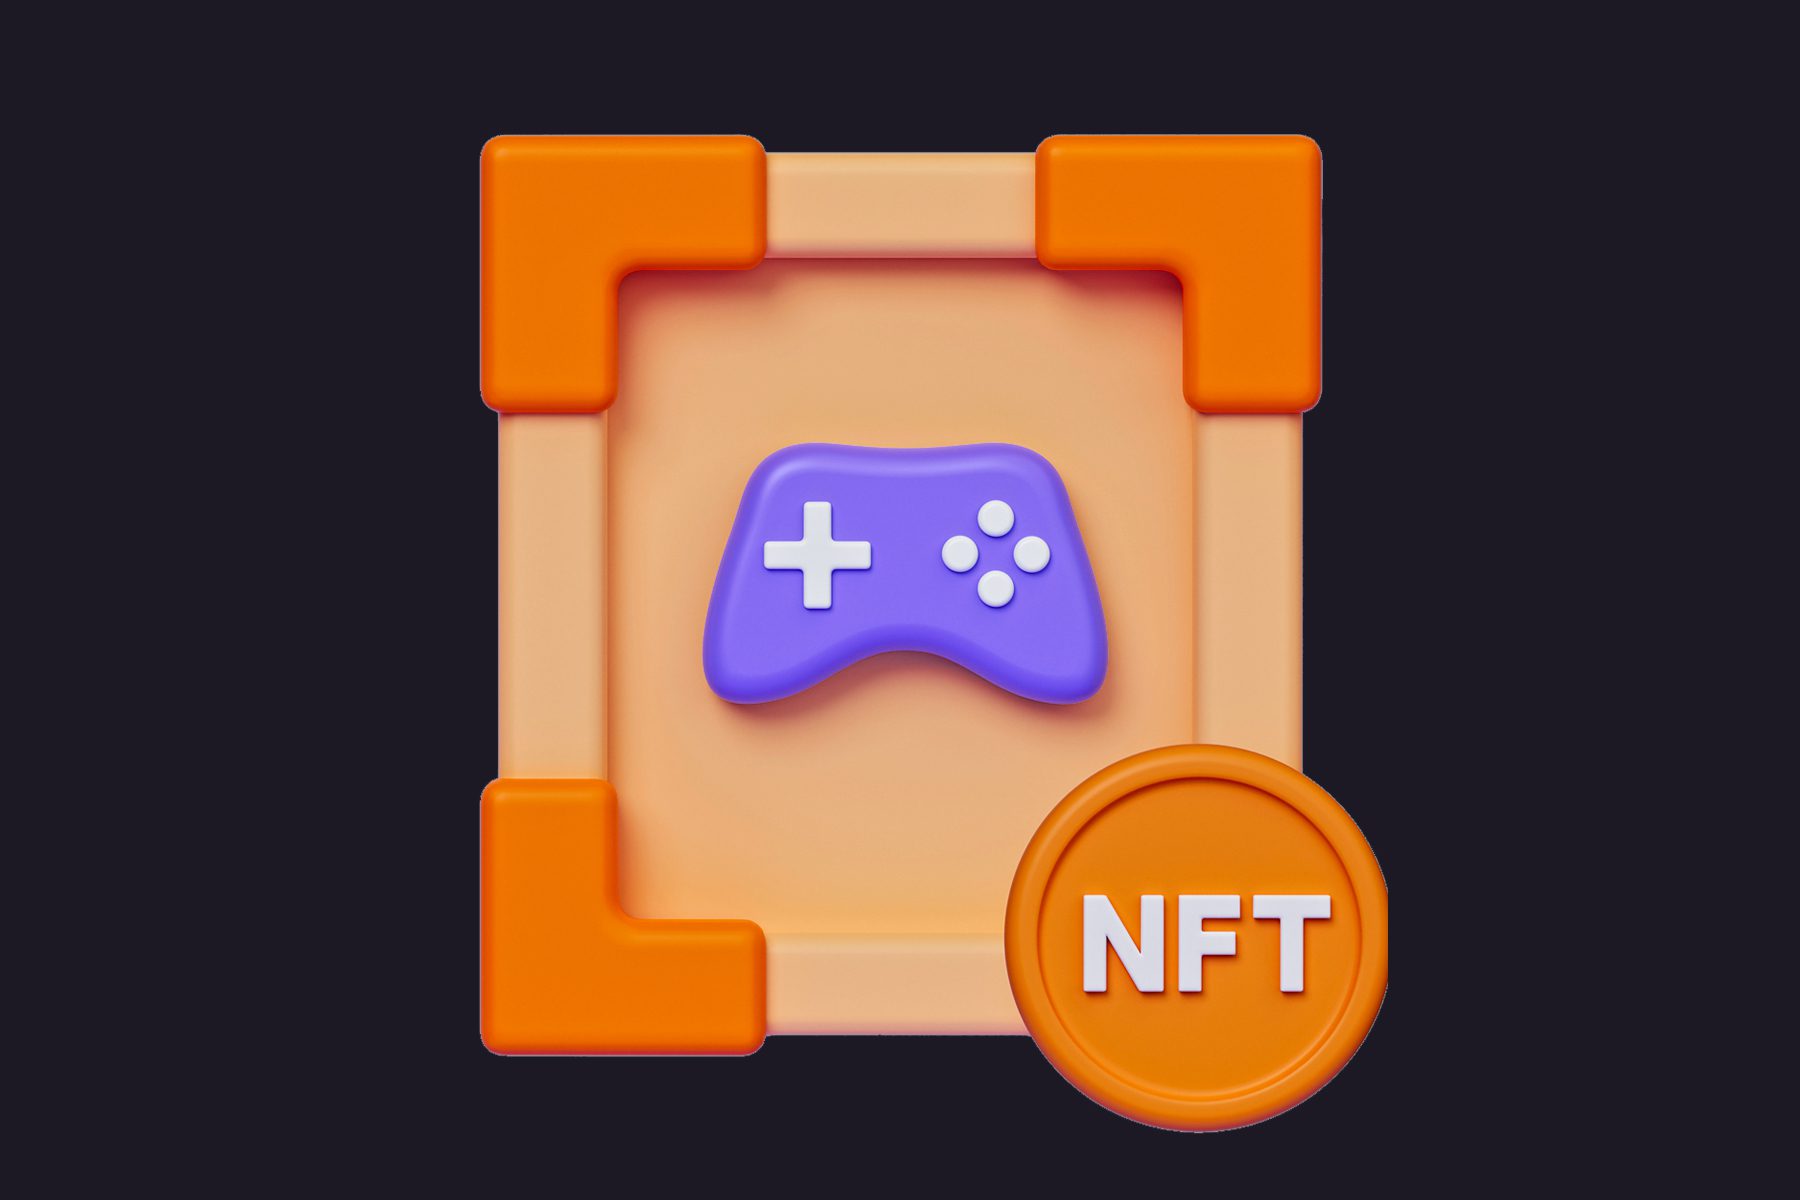 How to mint an interactive NFT video game